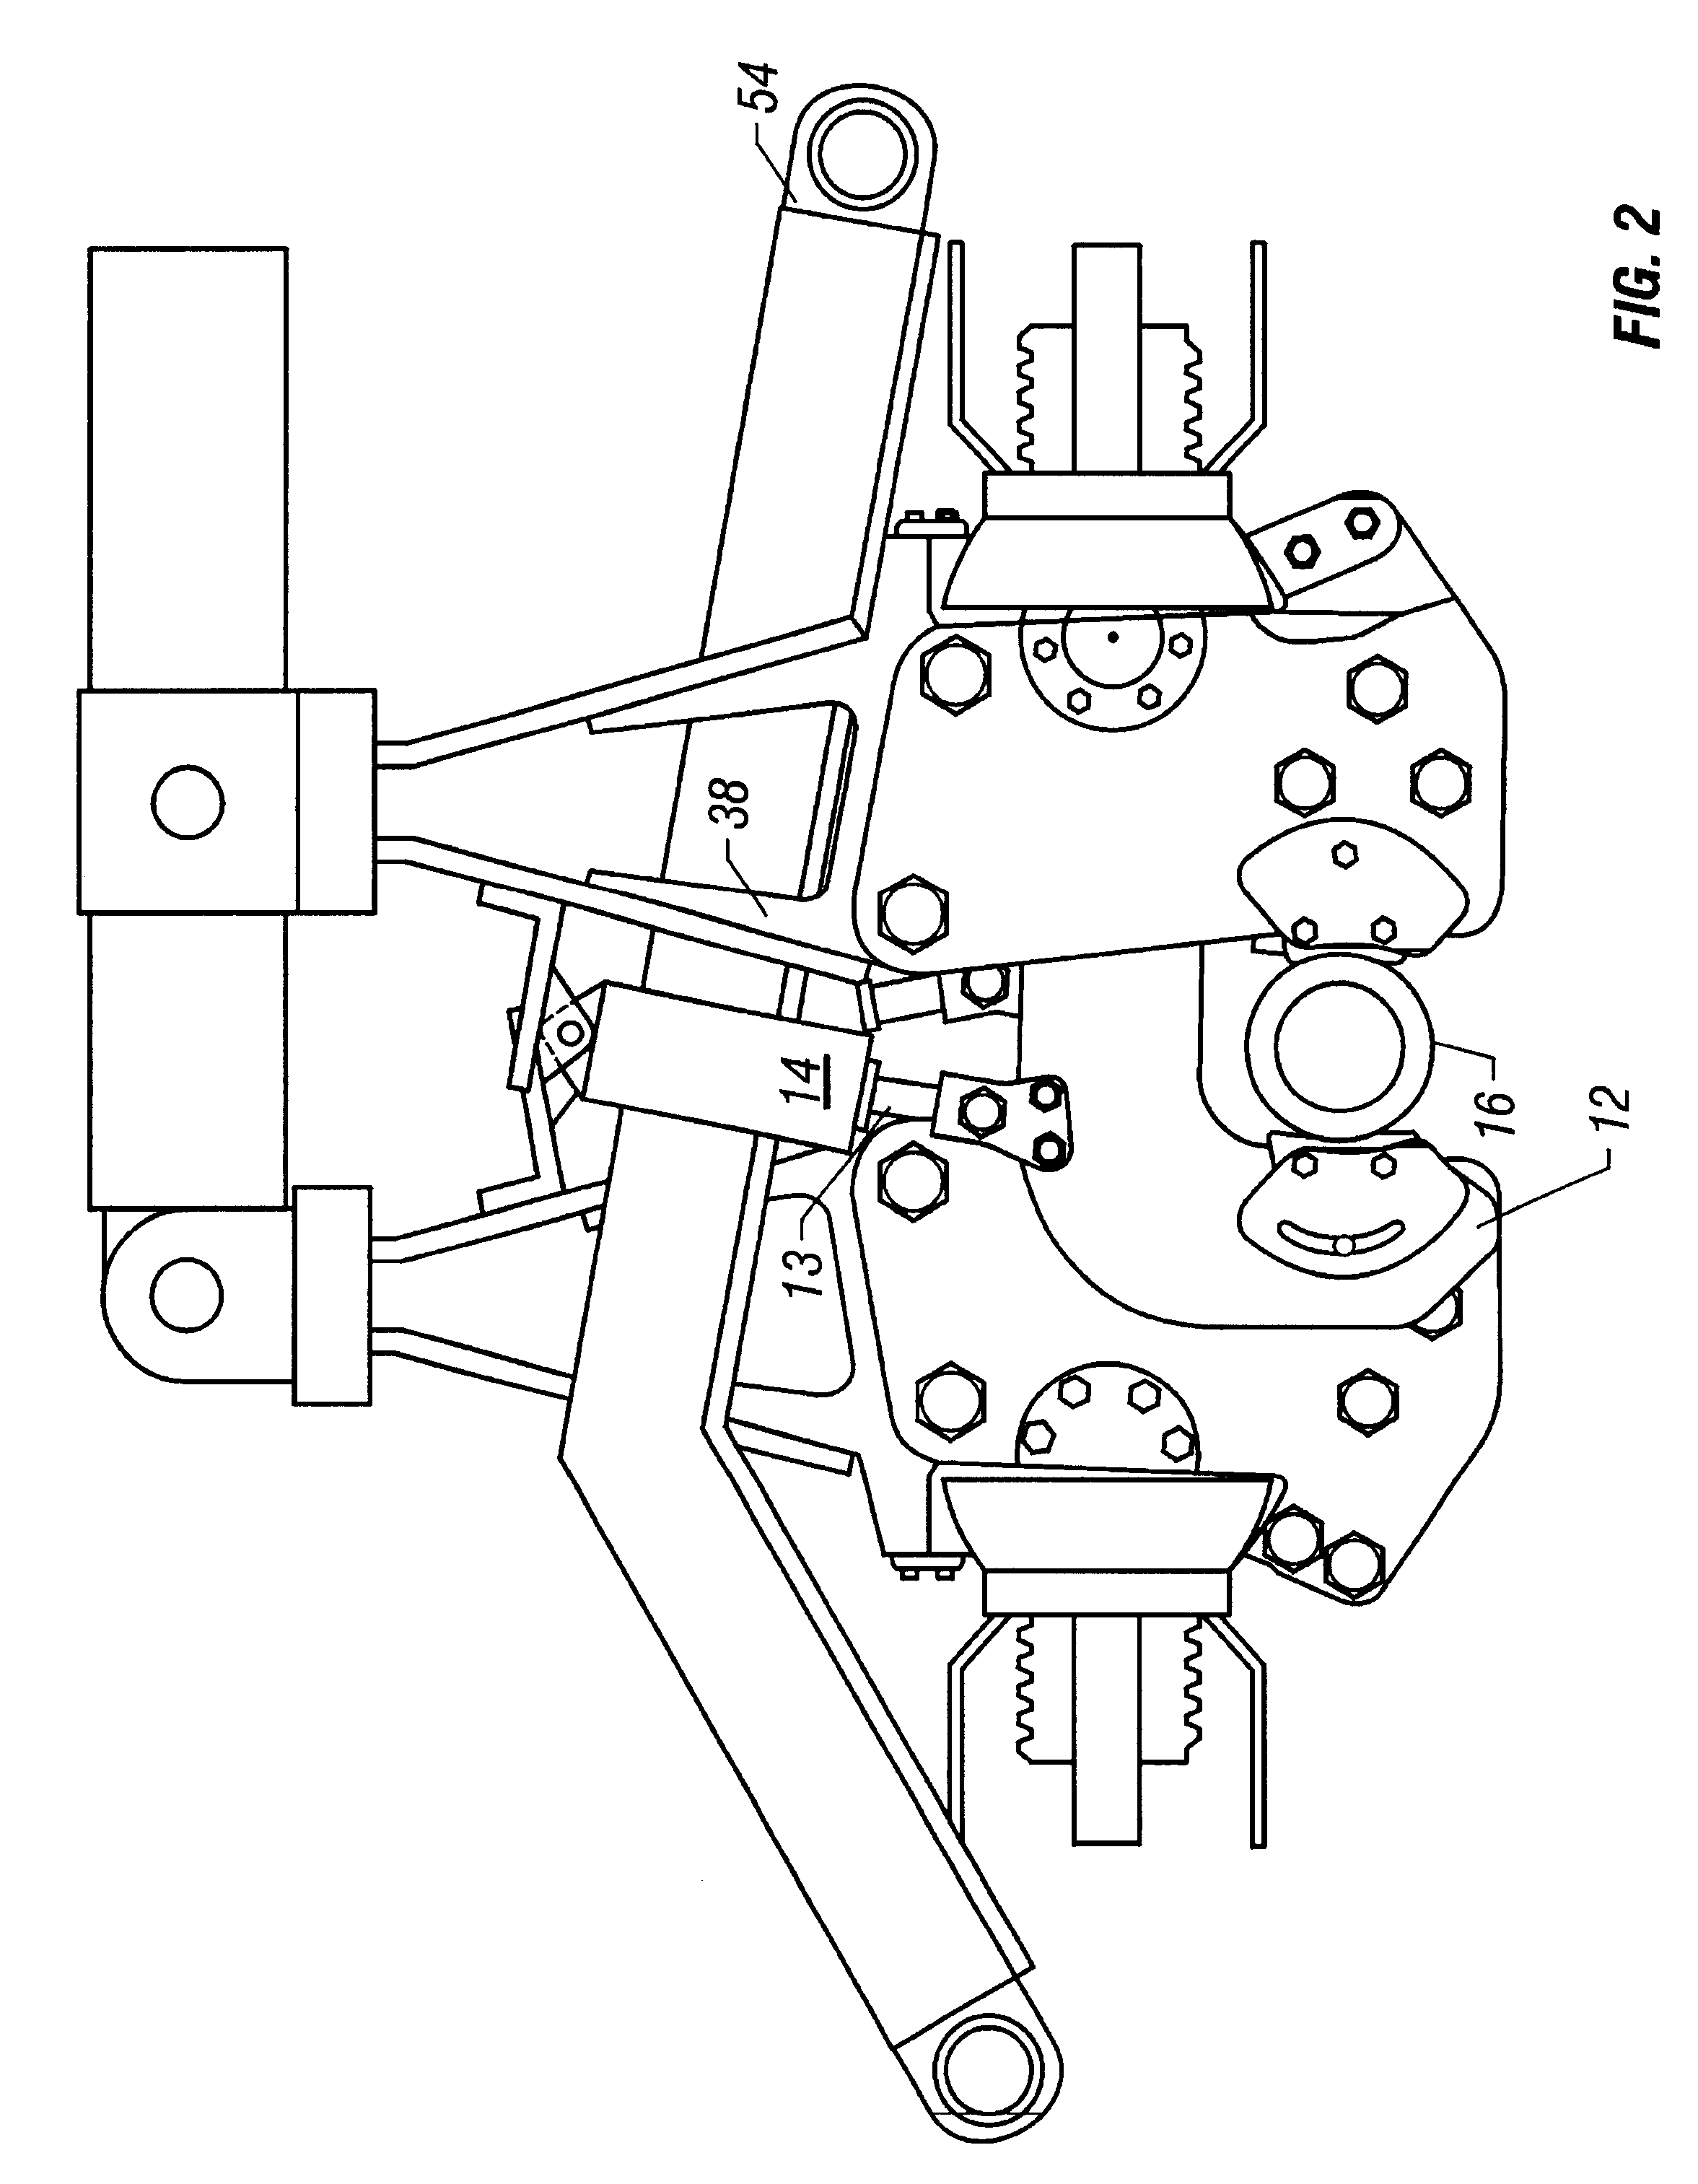 Apparatus and method for connecting wellbore tubulars